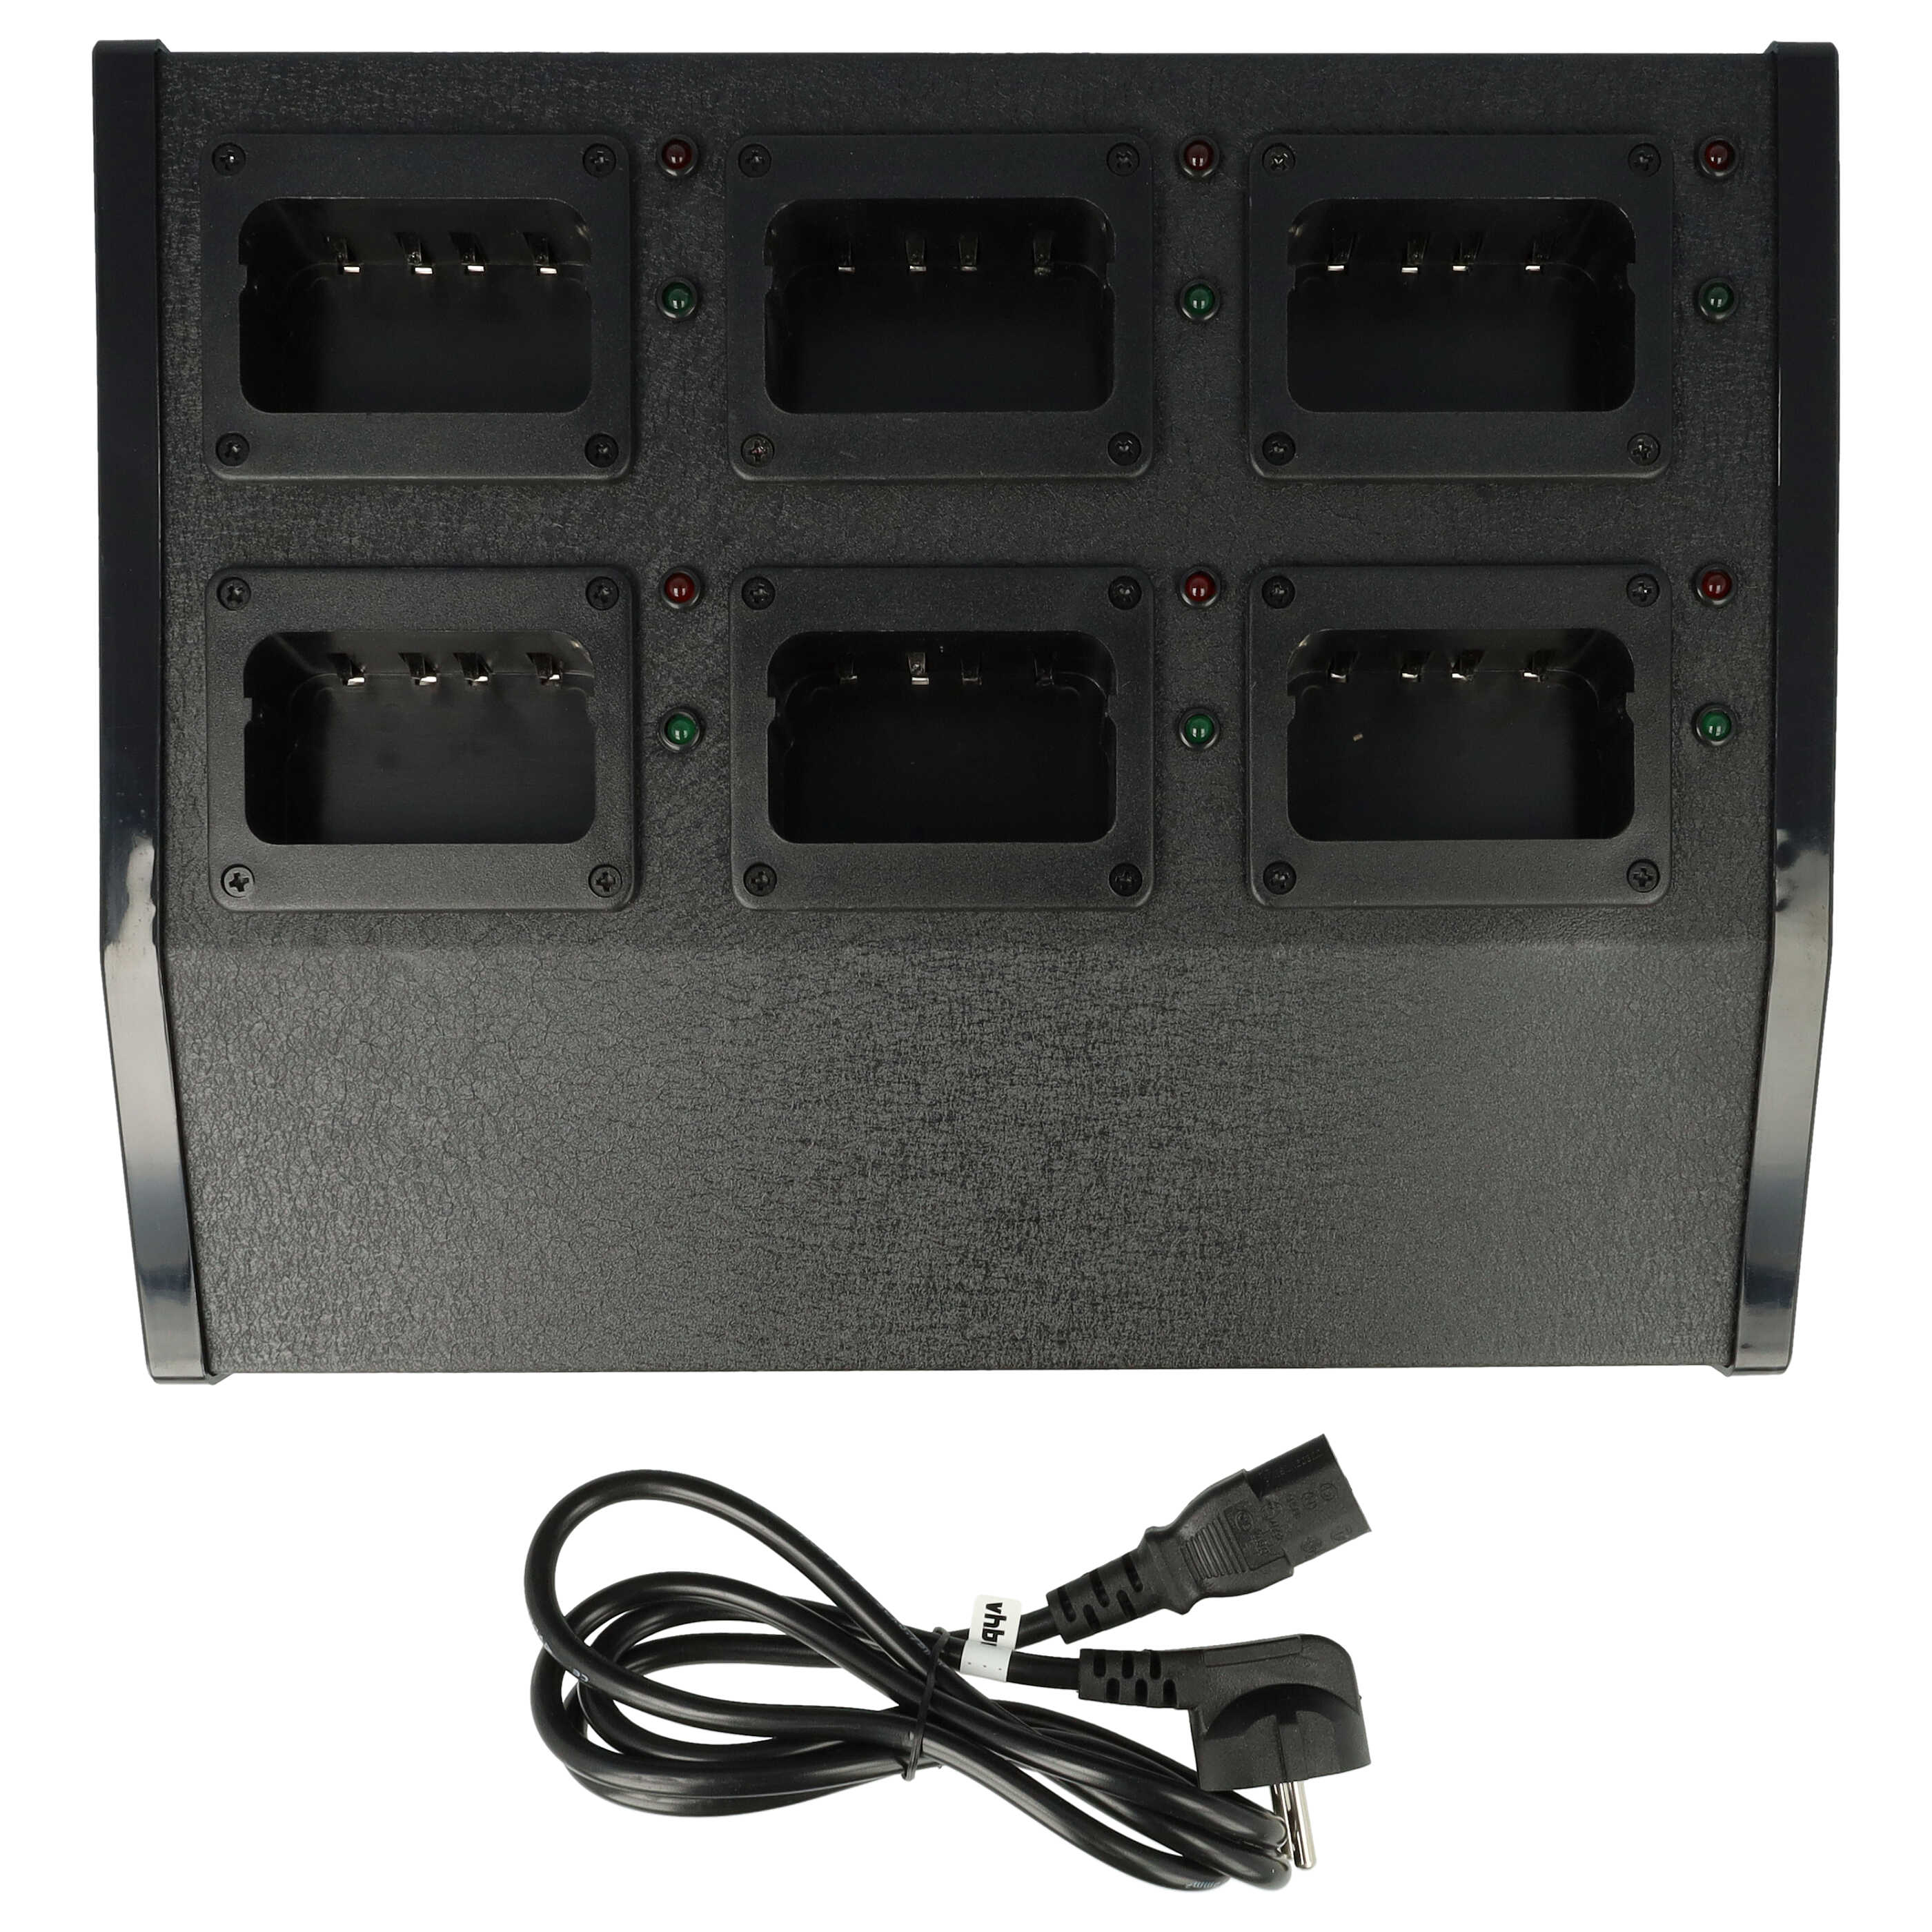 Charger Suitable for TK-180 Radio Batteries - 12 V, 6.0 A